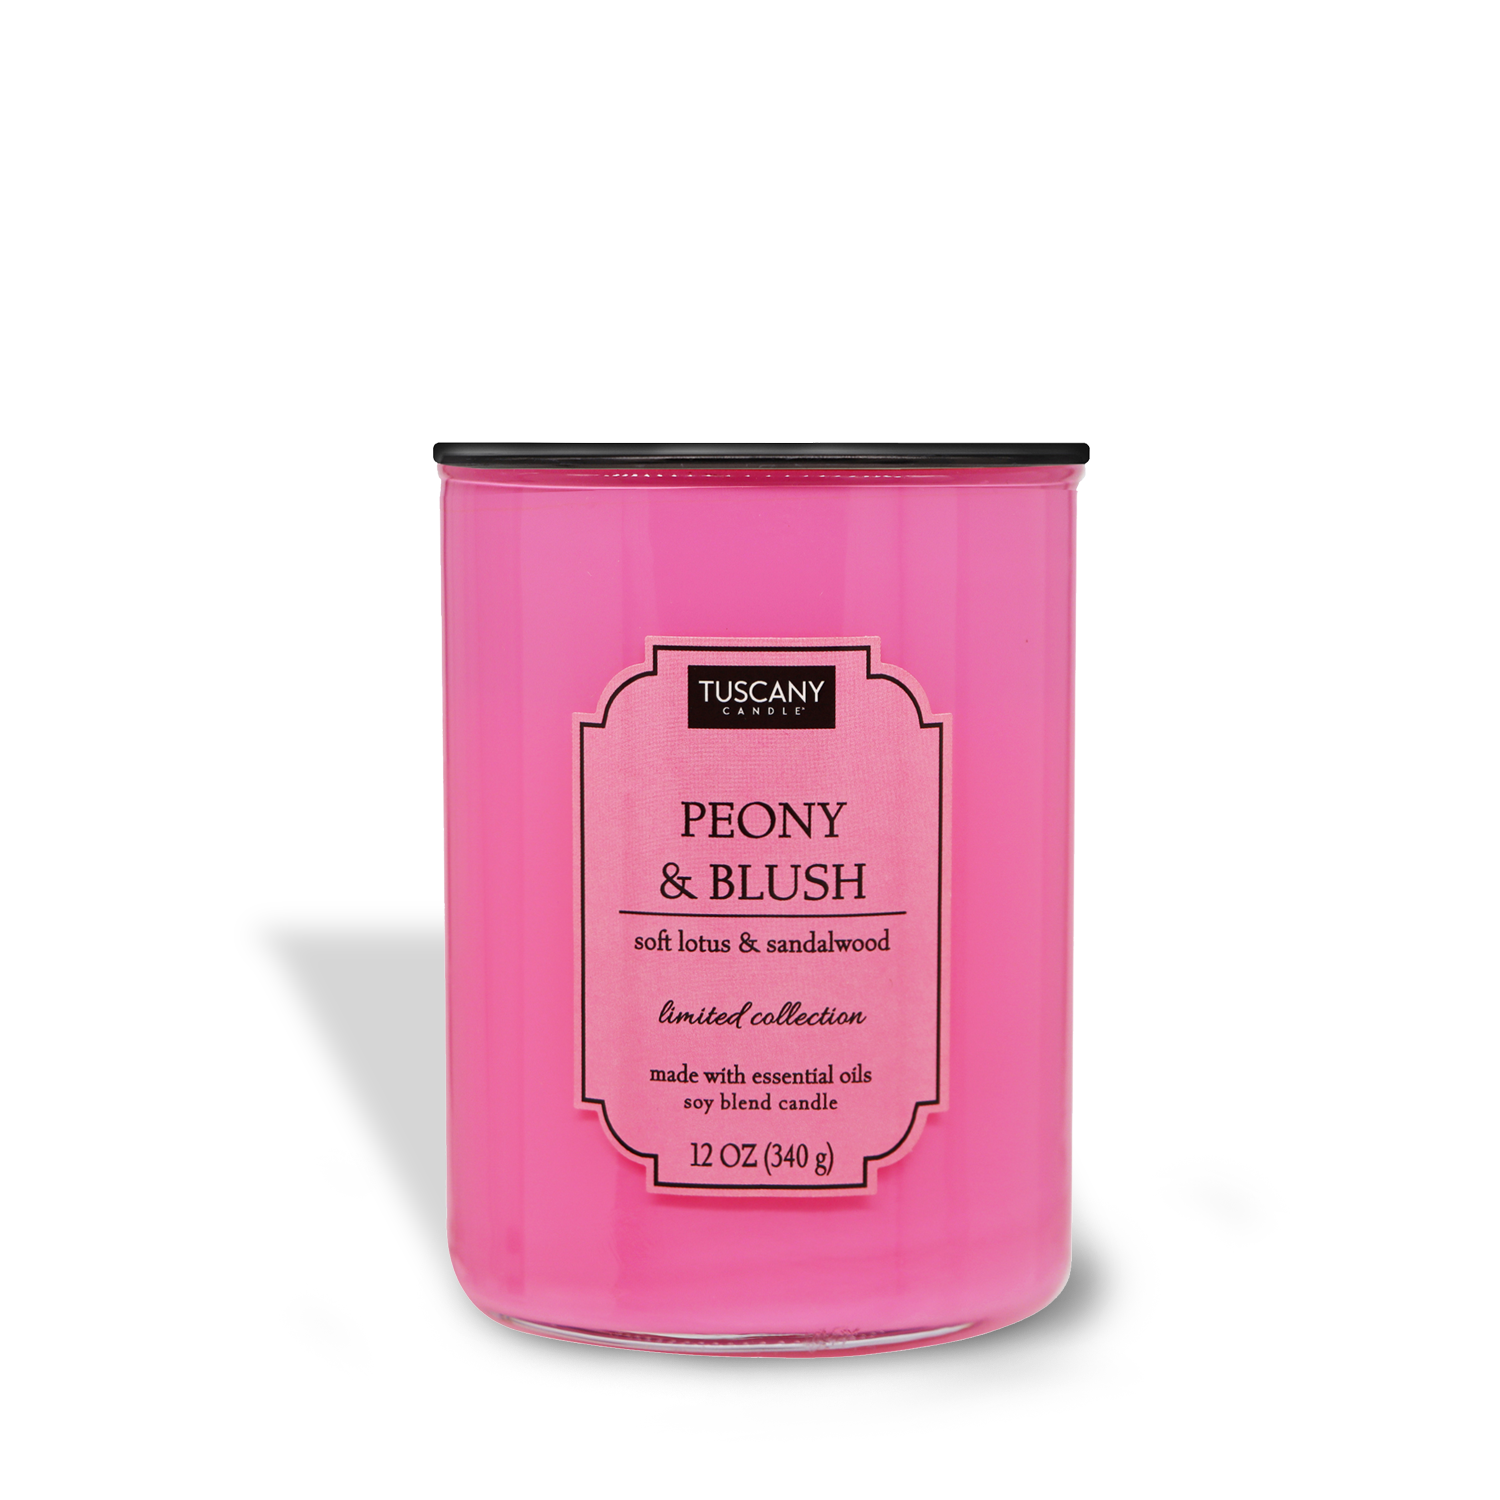 A pink Tuscany Candle® EVD Peony & Blush scented candle in a tin container from the Colorsplash collection, labeled with fragrance notes of soft lotus and sandalwood.